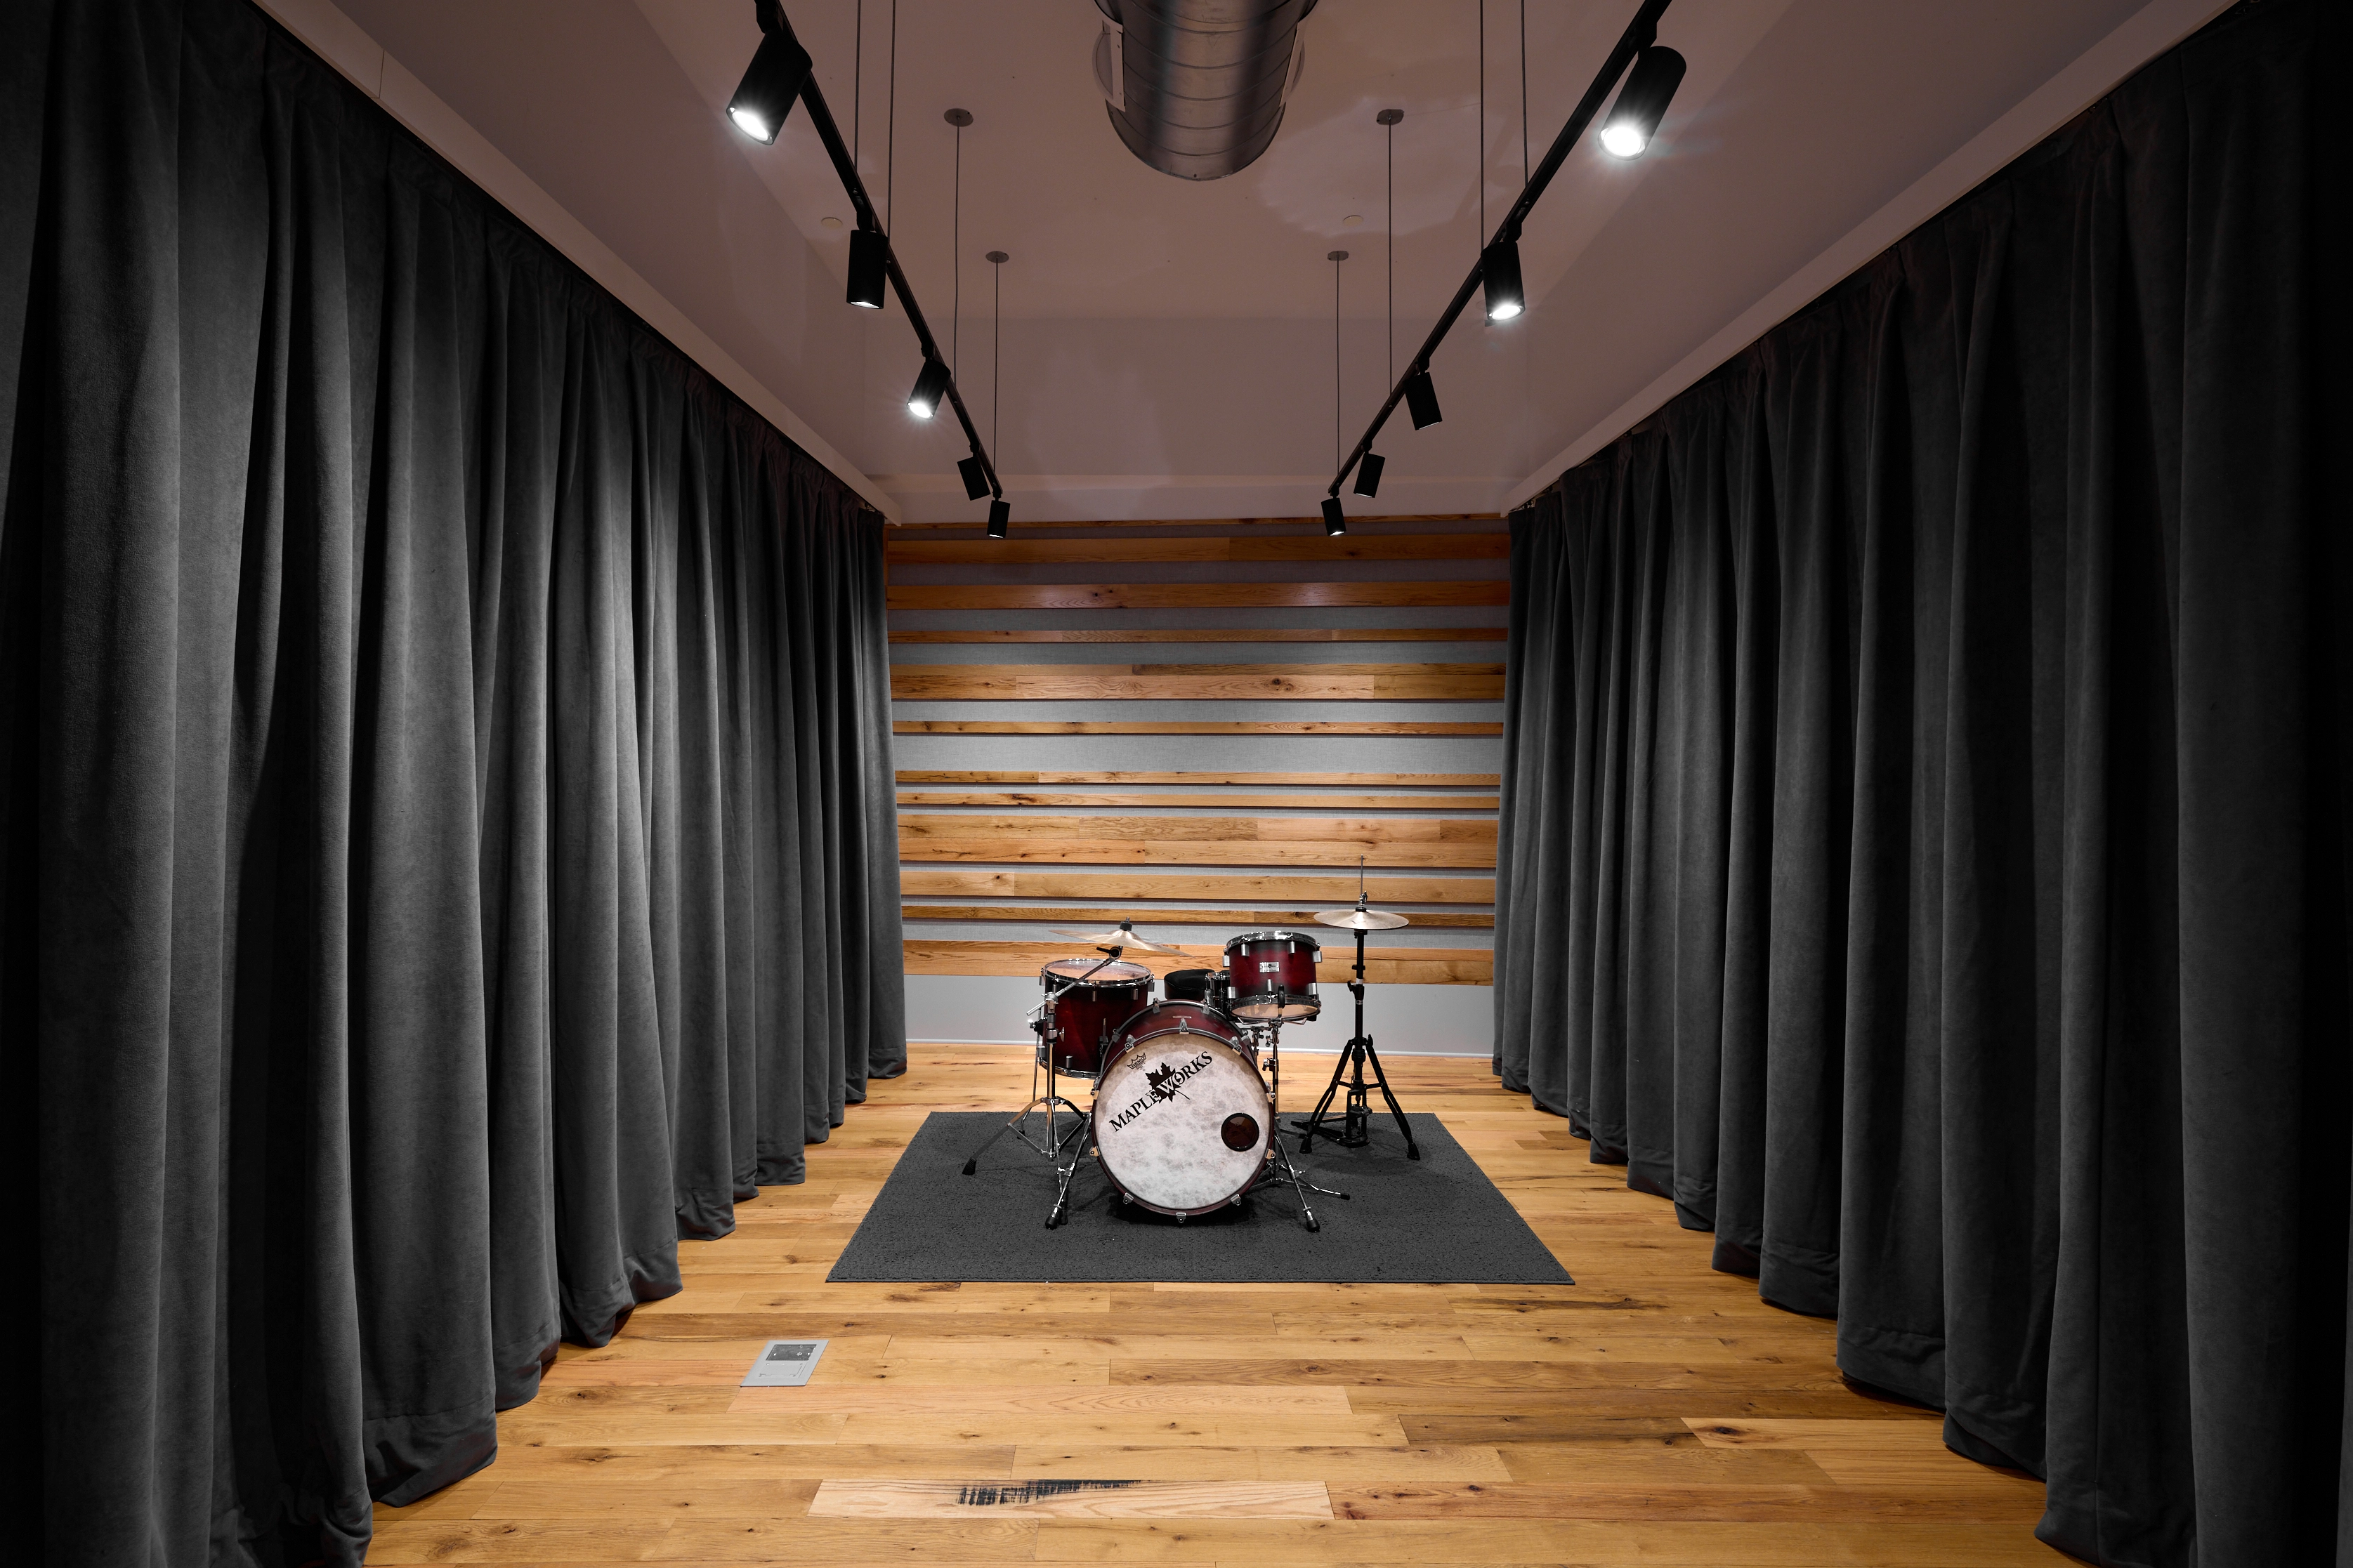 Studio B live room with curtains and a drumset